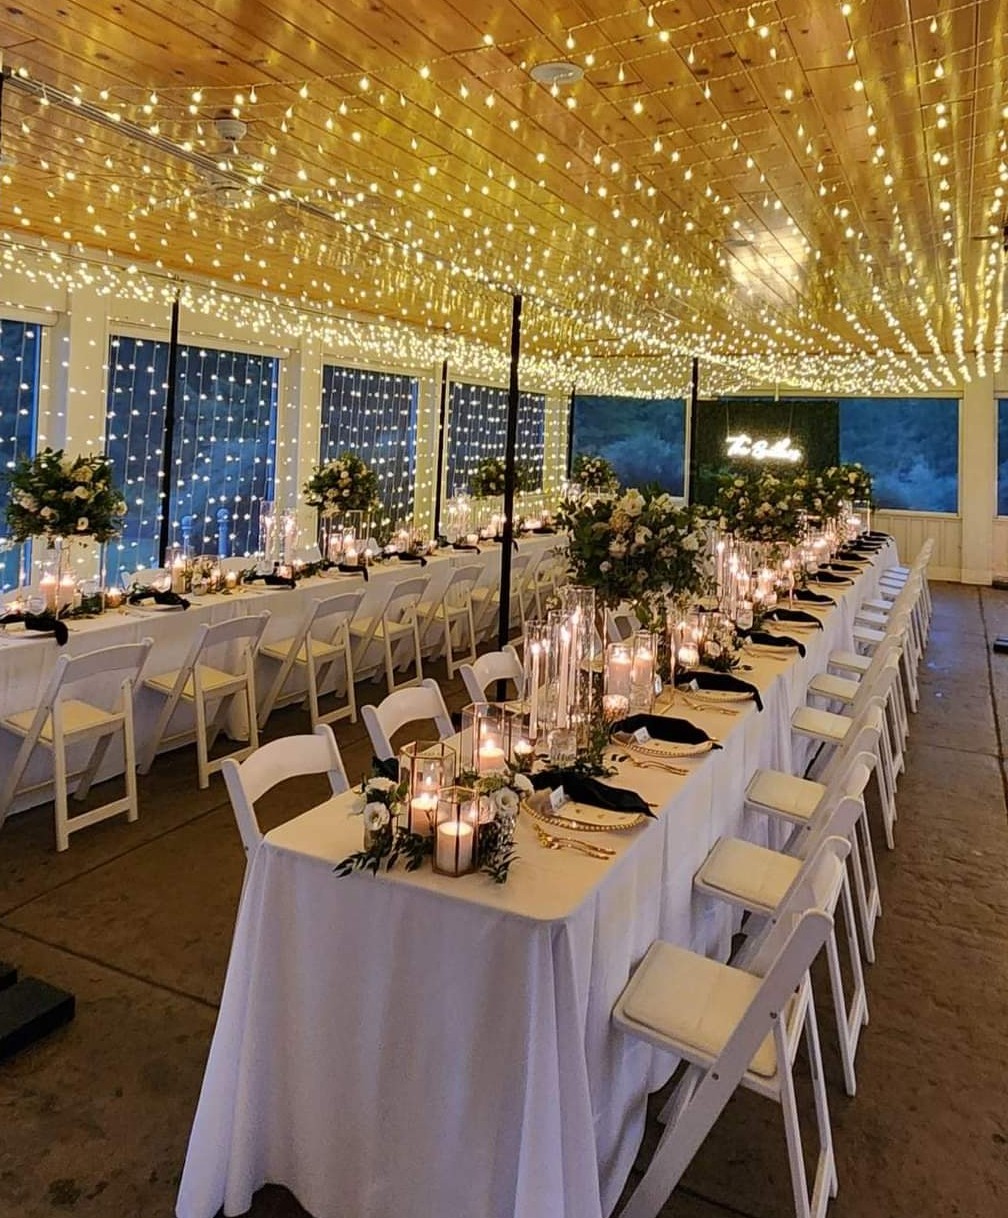 A ceiling full of lights with a LED curtain canopy over wedding tables.